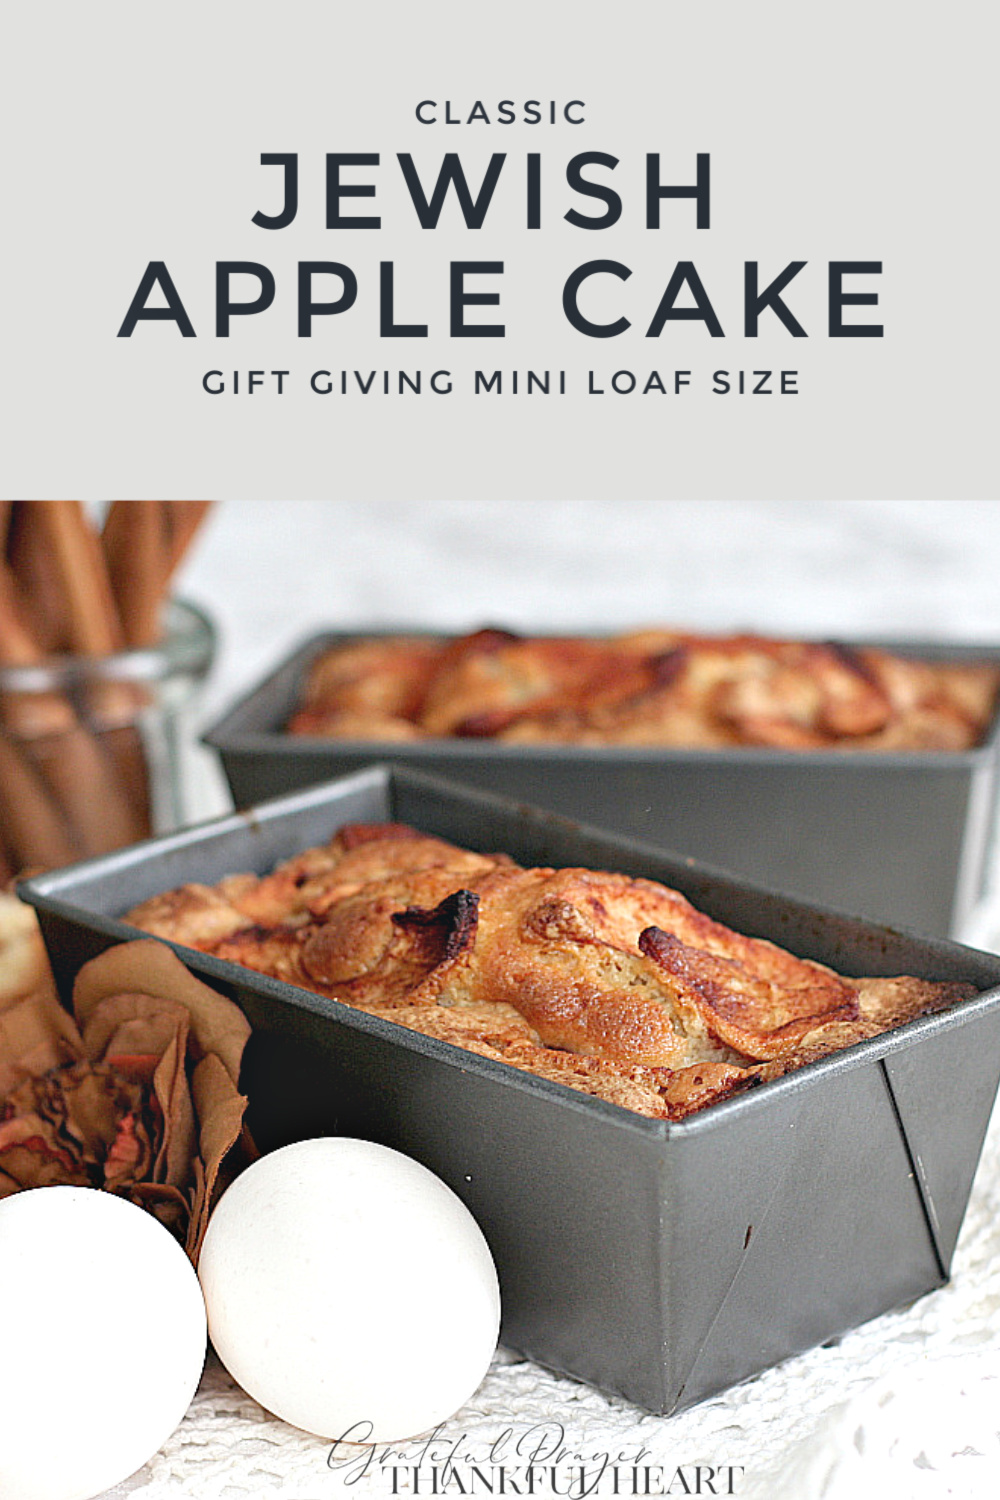 Incredibly delicious and moist, classic Jewish apple cake from mom's vintage recipe. Baked in a tube or Bundt pan and filled with the wonderful autumn flavors of apple and cinnamon. Lovely gift from the kitchen.